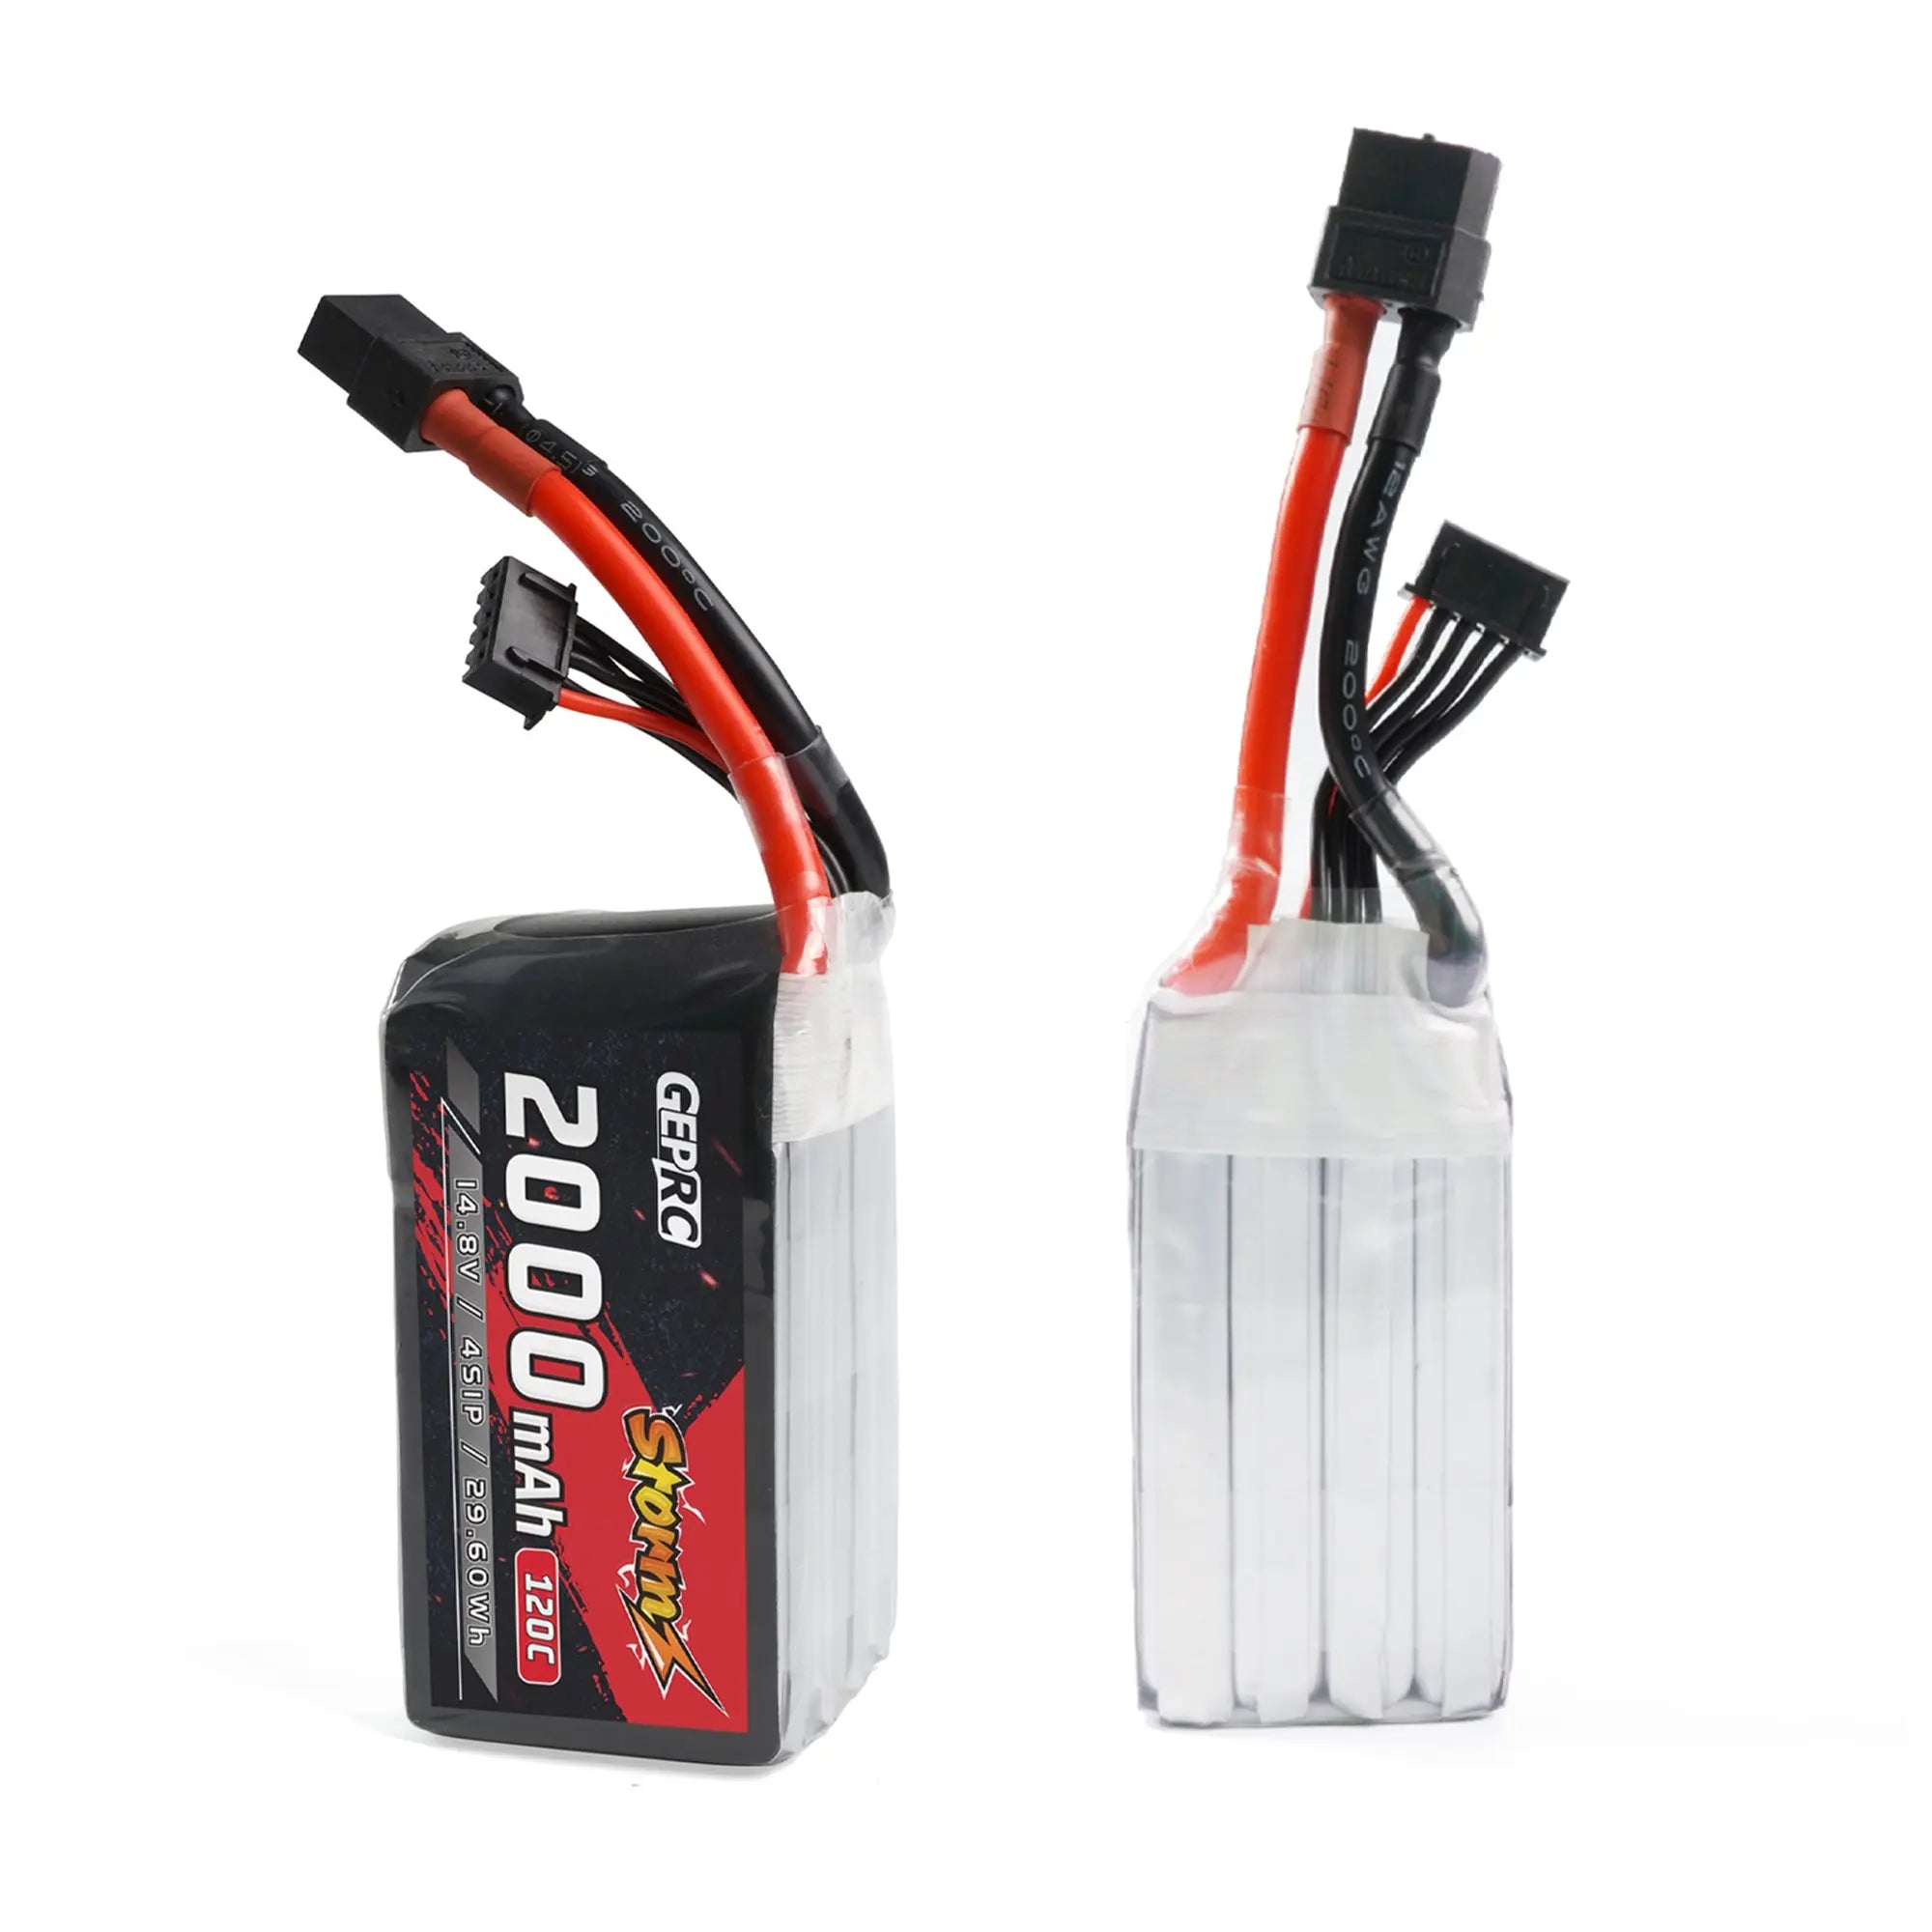 GEPRC Storm 4S 2000mAh 120C Lipo Battery, safe and stable formula, high quality cells ,long-lasting cycle life